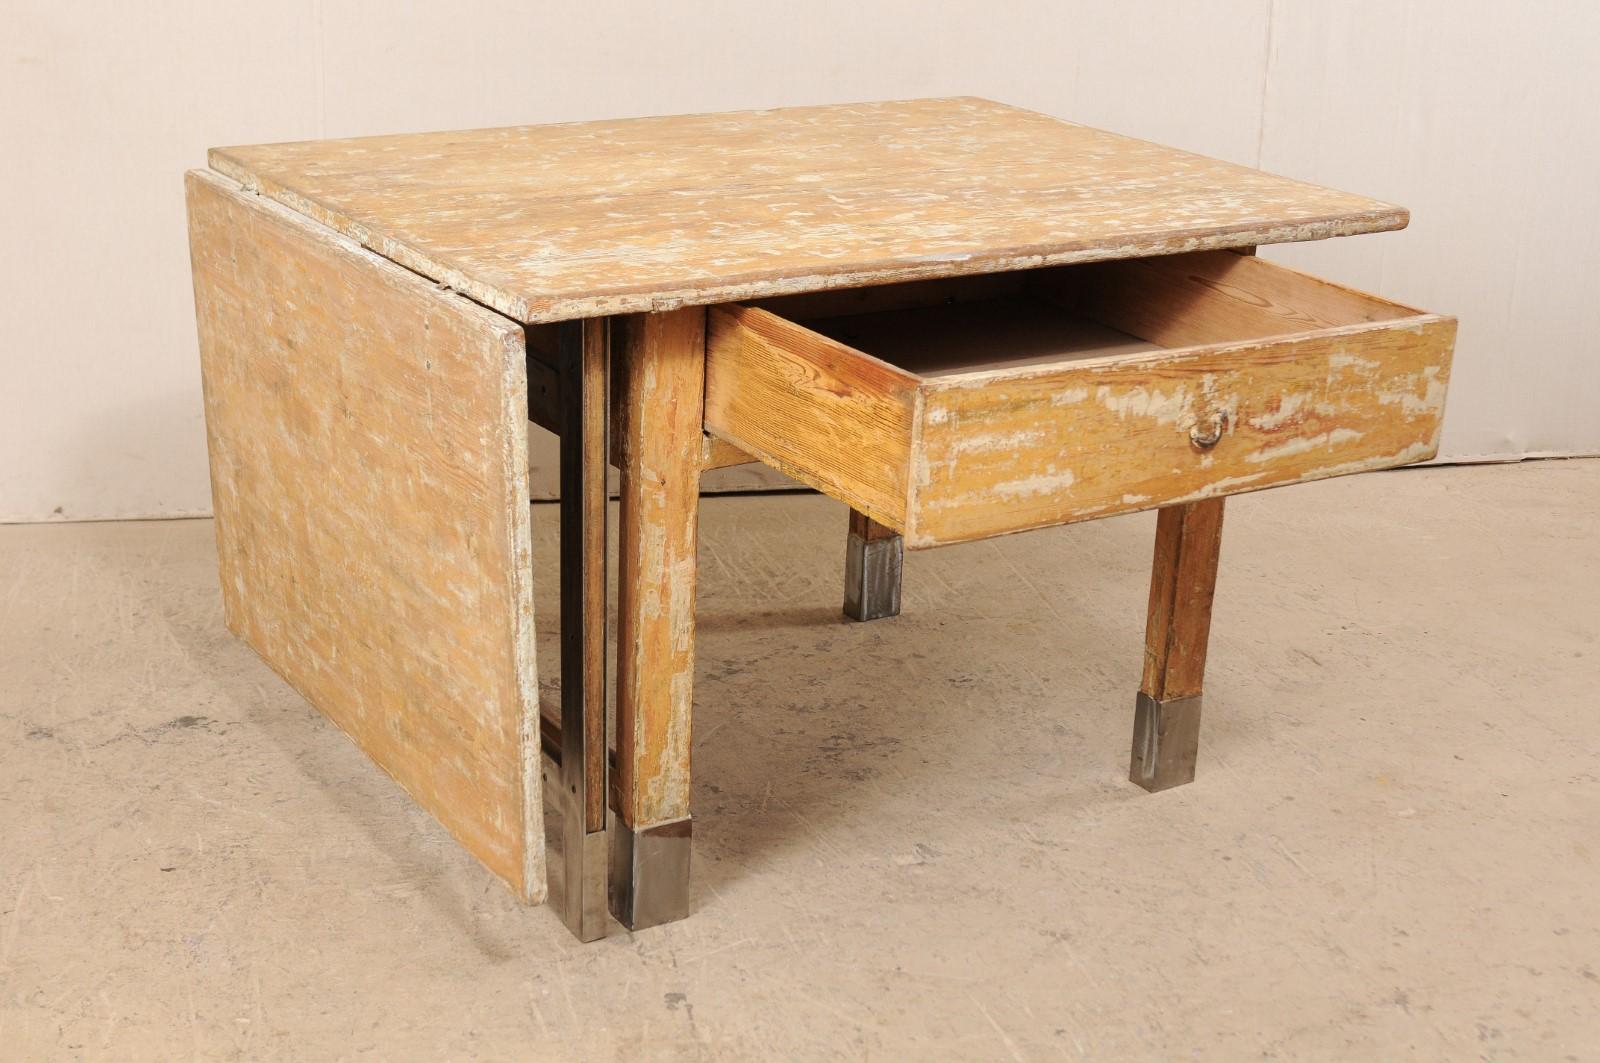 A Swedish gate leg table from the 19th century with contemporary additions. This antique farmhouse style table from Sweden features a rectangular-shaped top with single drop leaf and gate leg extension at one side, and a single drawer set into the